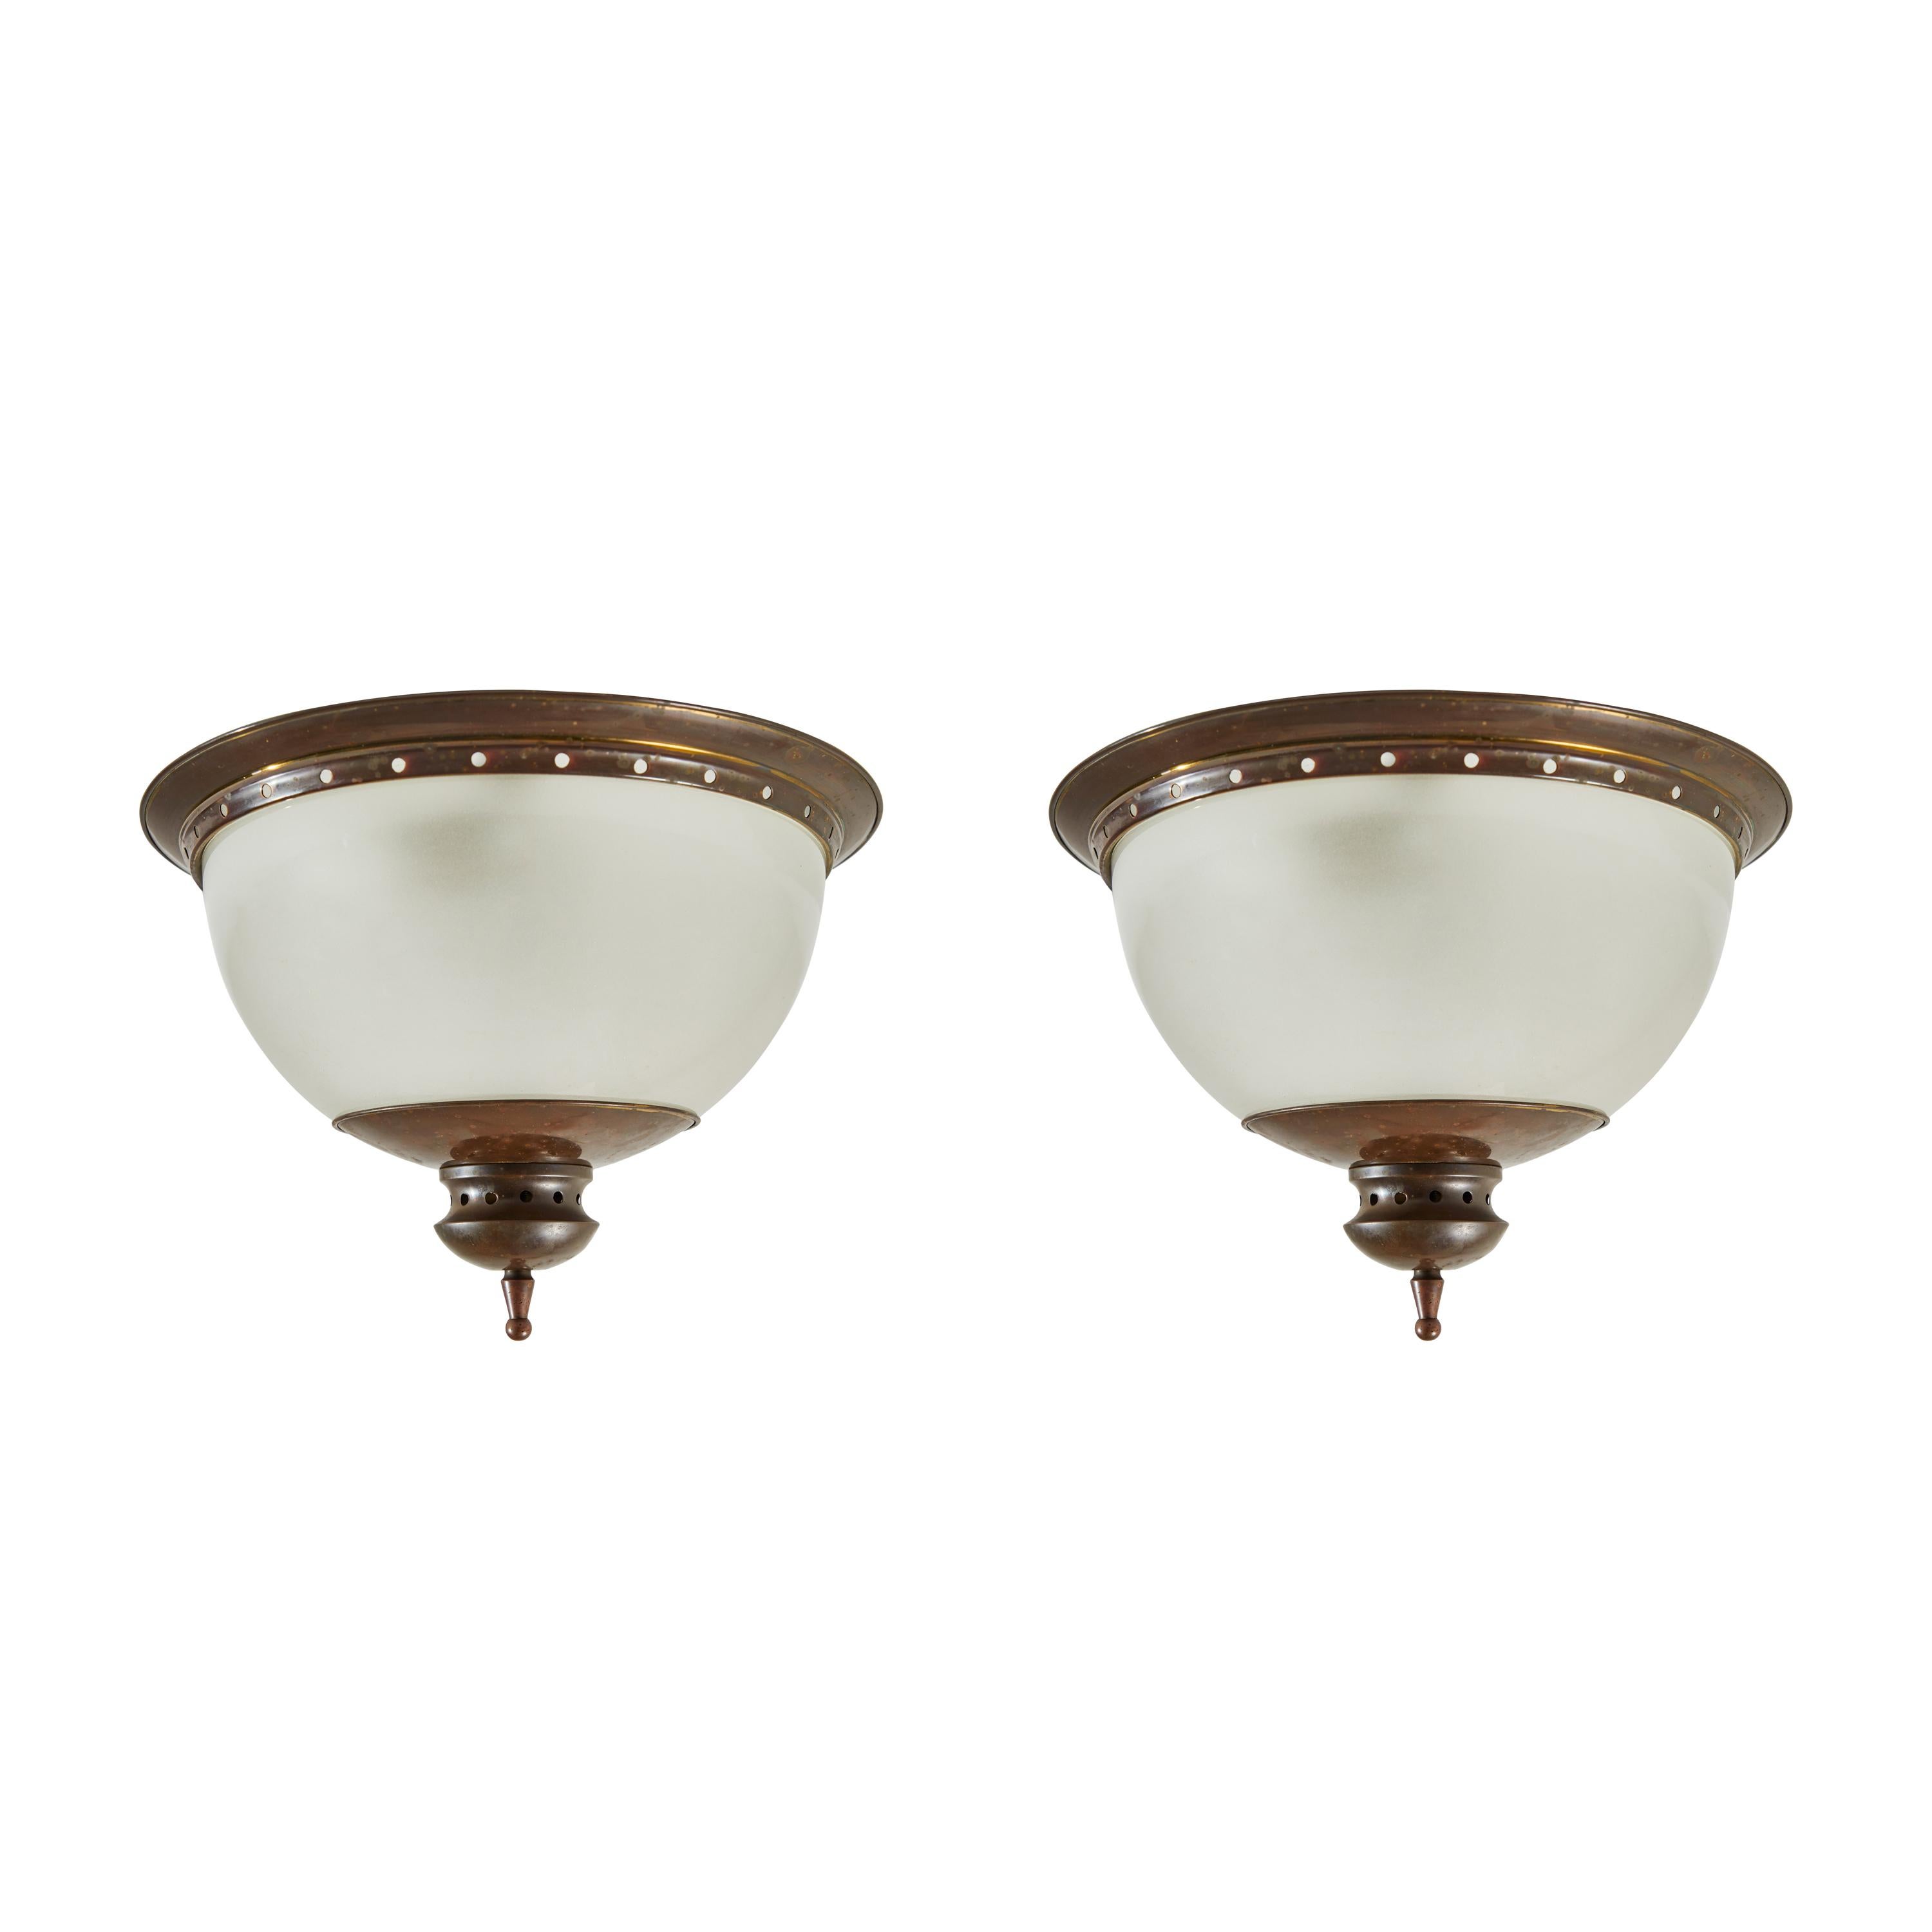 Two Flush Mount Ceiling Lights by Caccia Dominioni for Azucena